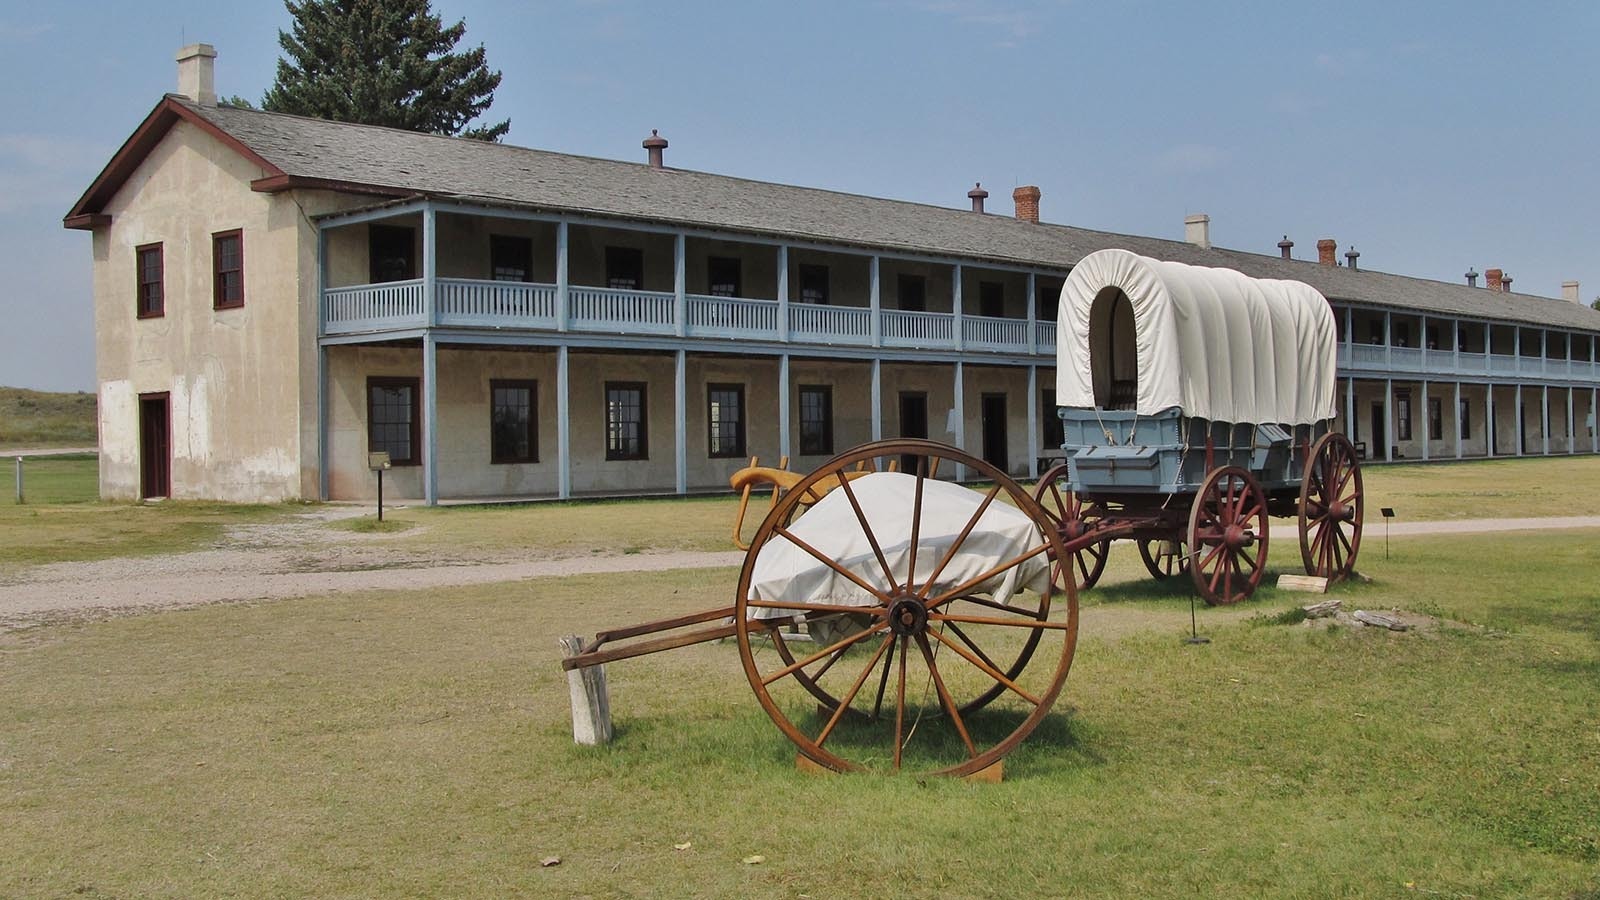 Historic Fort Laramie was an important military and exploratory outpost along the trails that brought pioneers to the West.